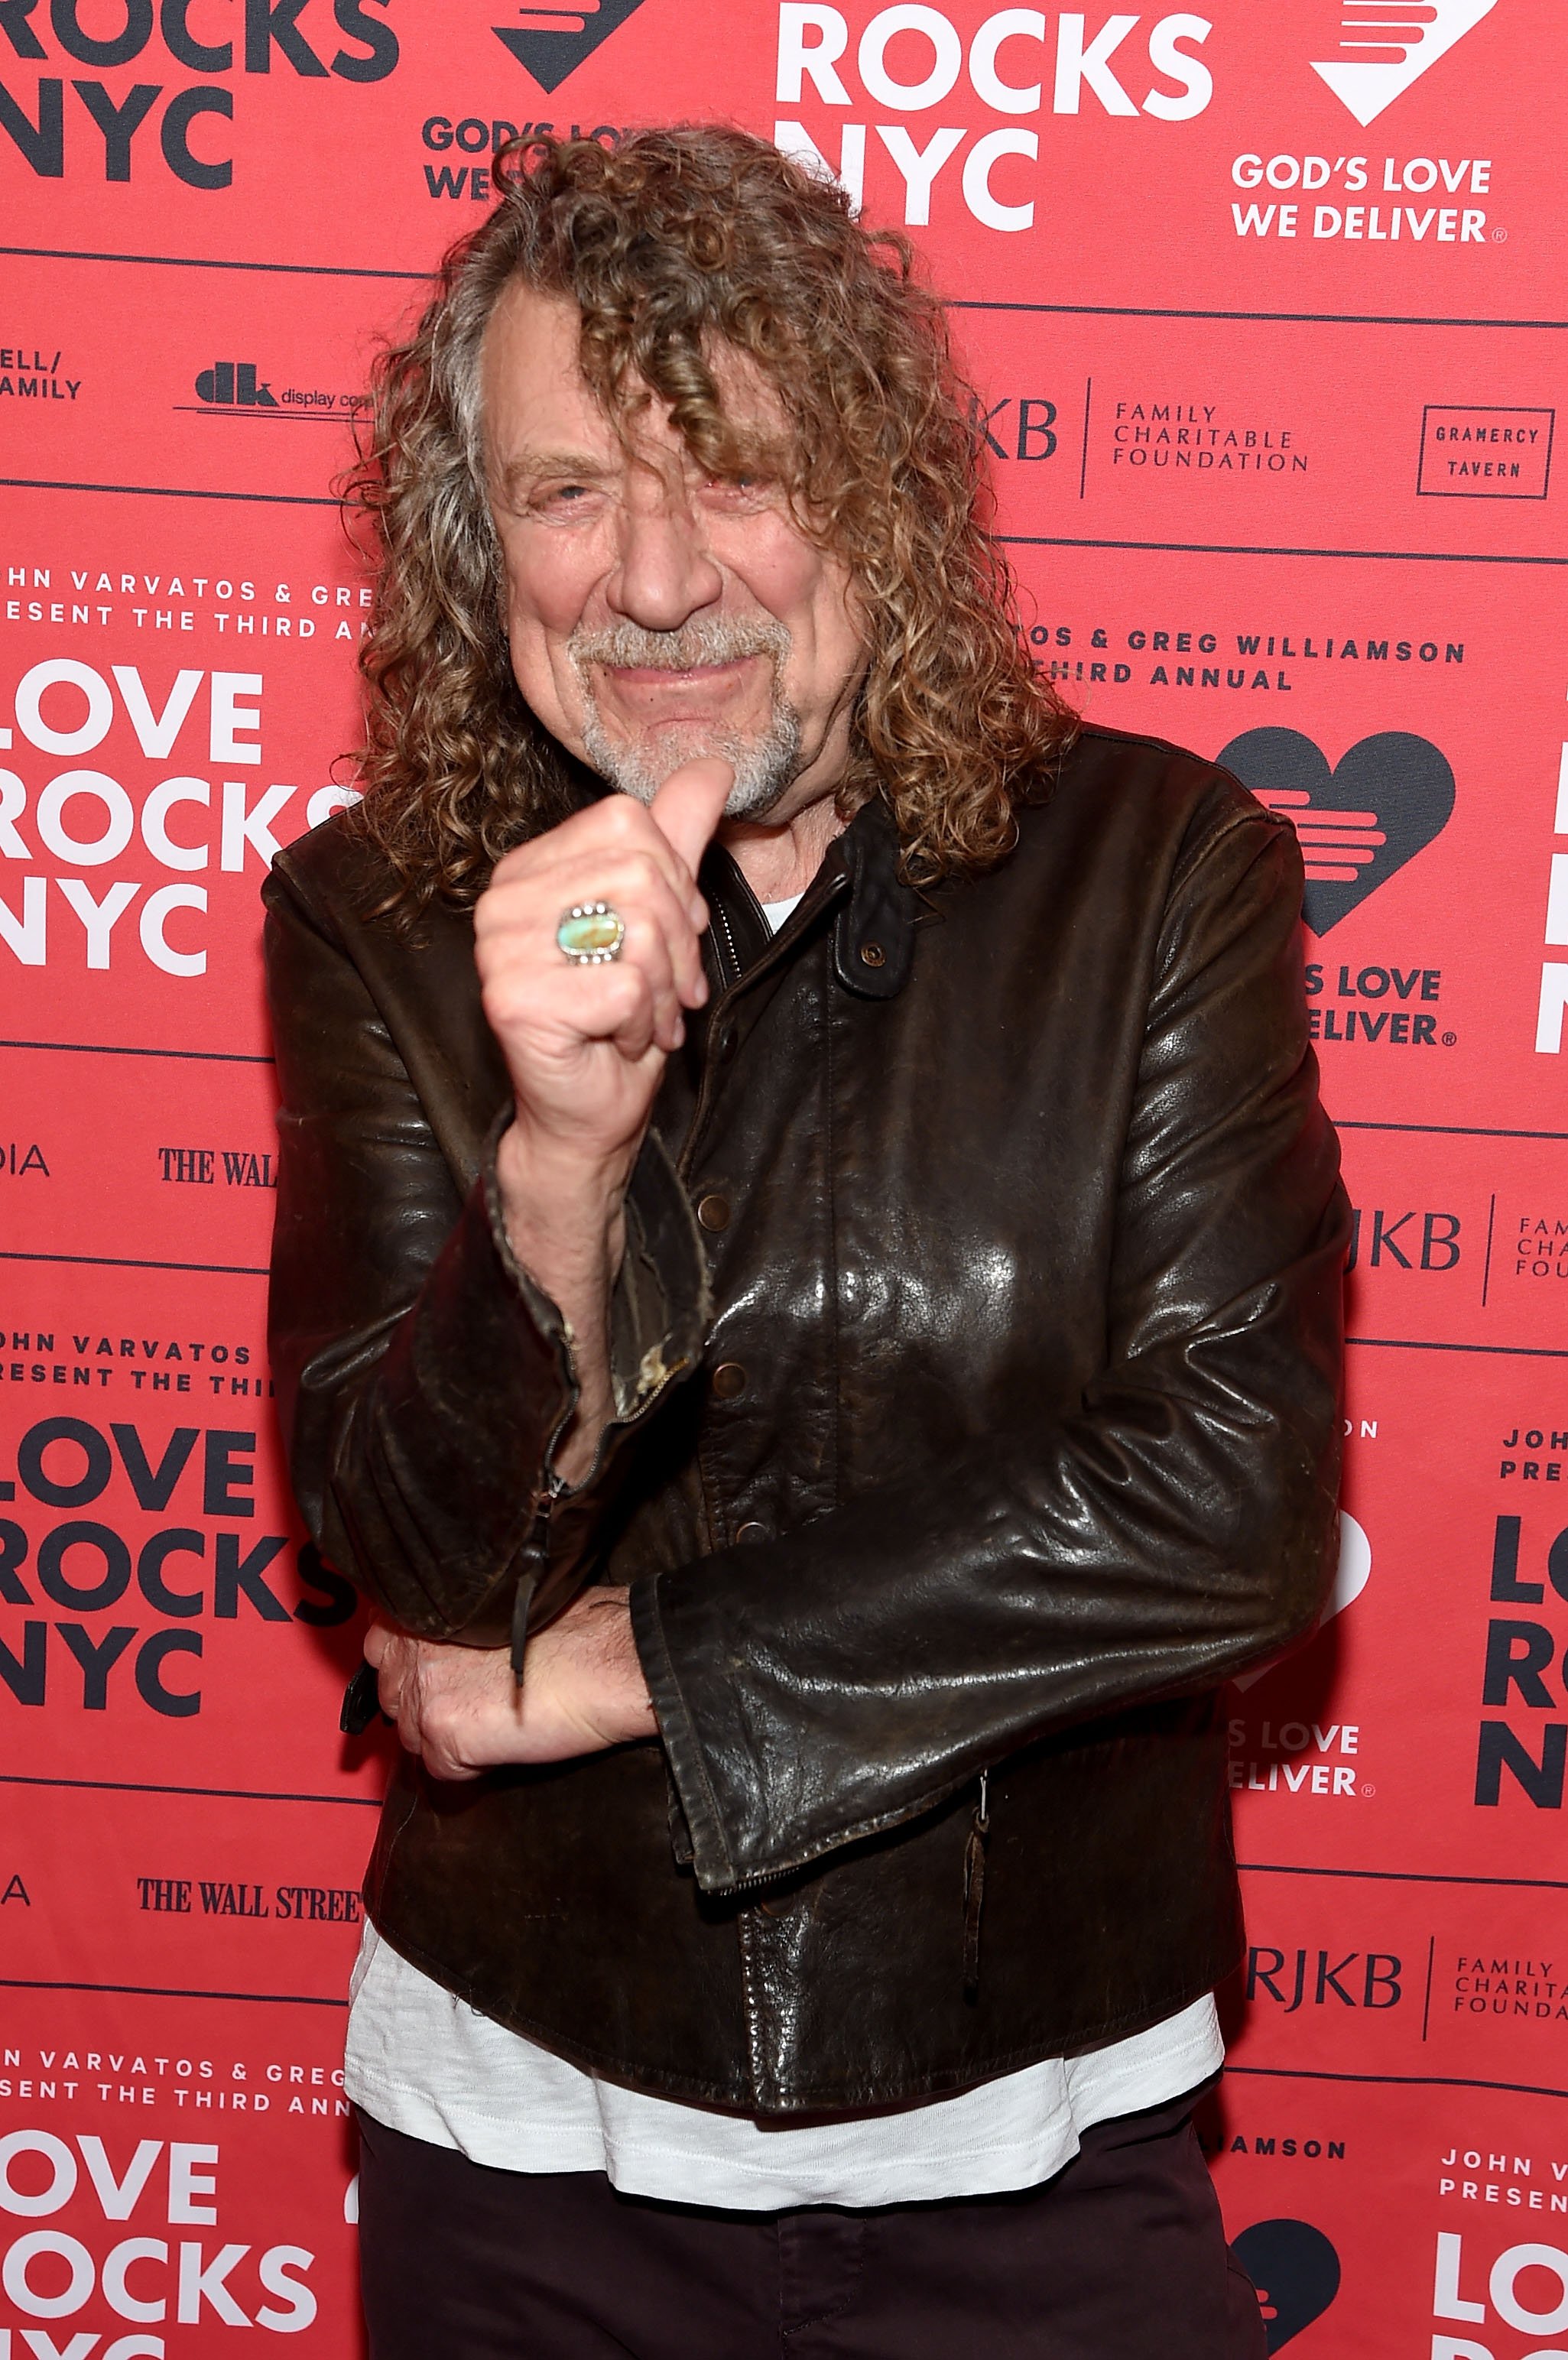 Robert Plant at the Third Annual Love Rocks NYC Benefit Concert on March 7, 2019 in New York City |  Source: Getty Images